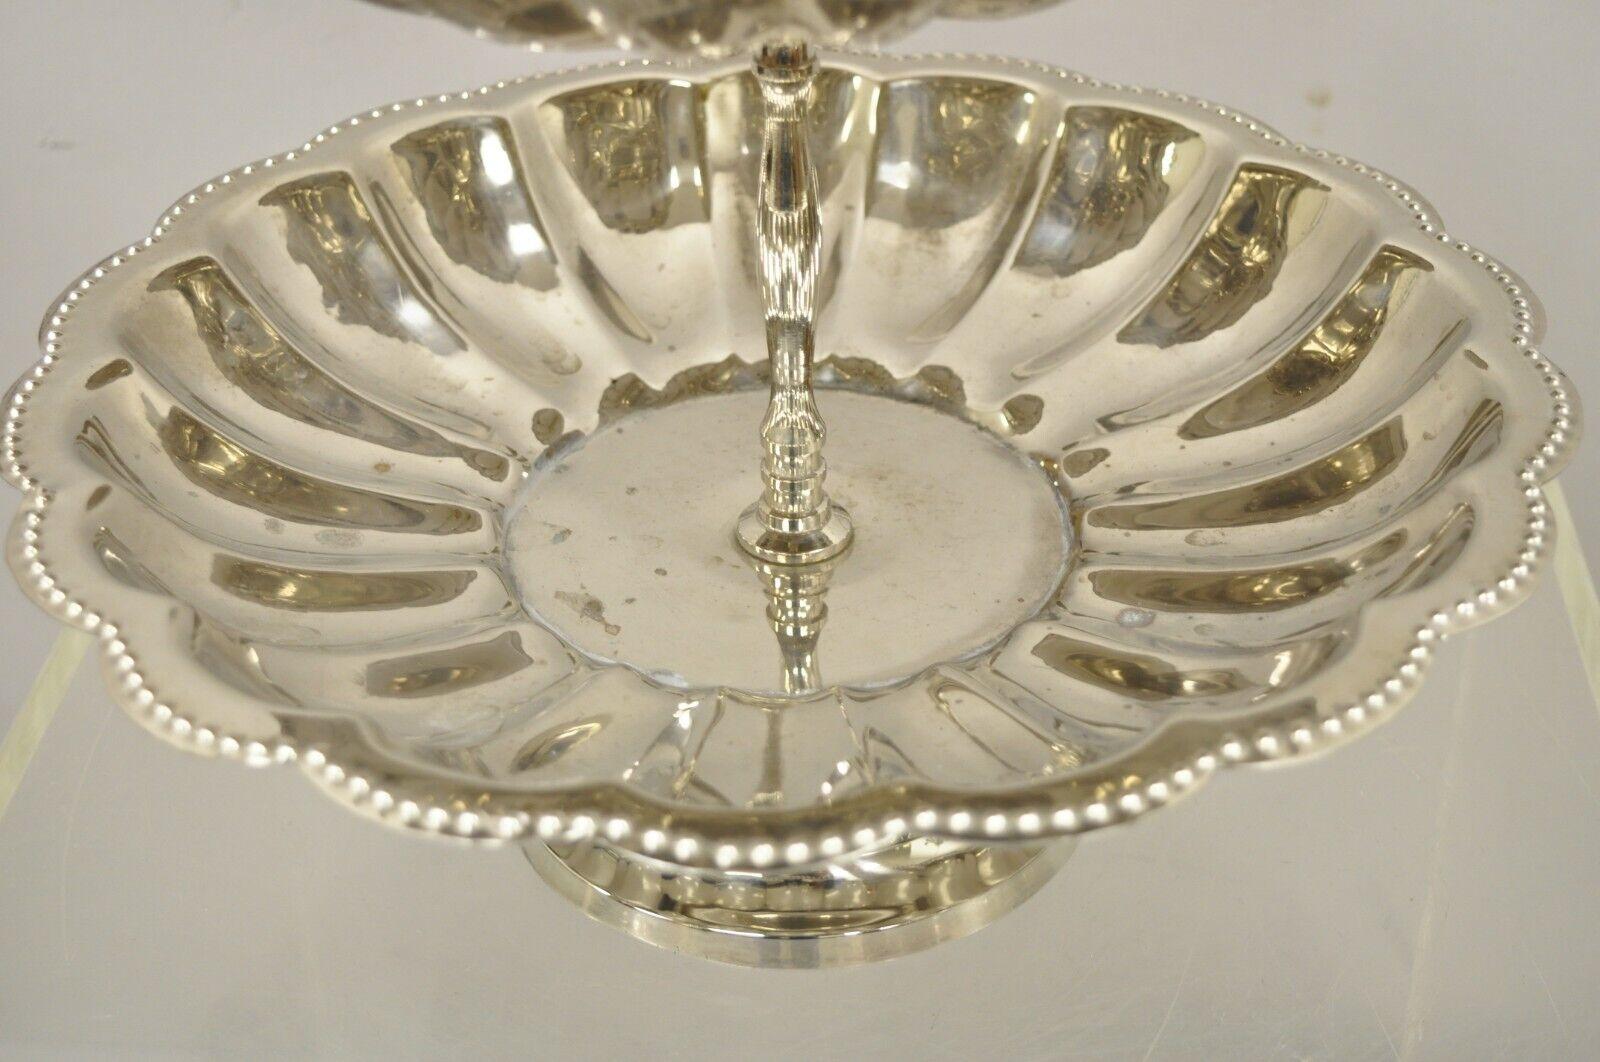 Vintage French Regency Style 3 Tier Silver Plate Serving Platter Stand 3